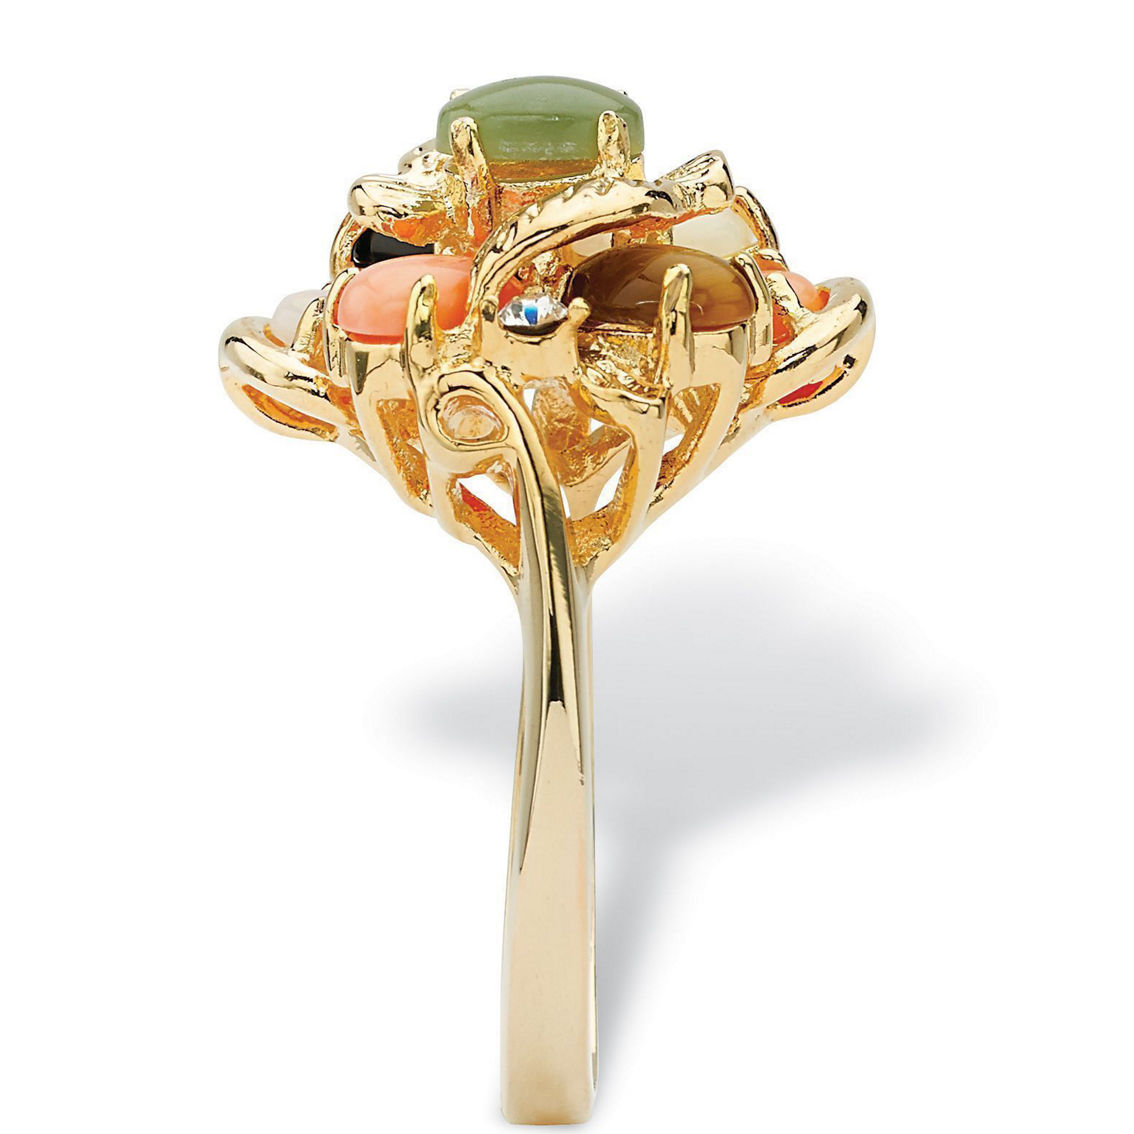 Oval Genuine Coral, Opal, Jade, Onyx and Tiger's-Eye Cluster 18k Gold-Plated Ring - Image 2 of 5